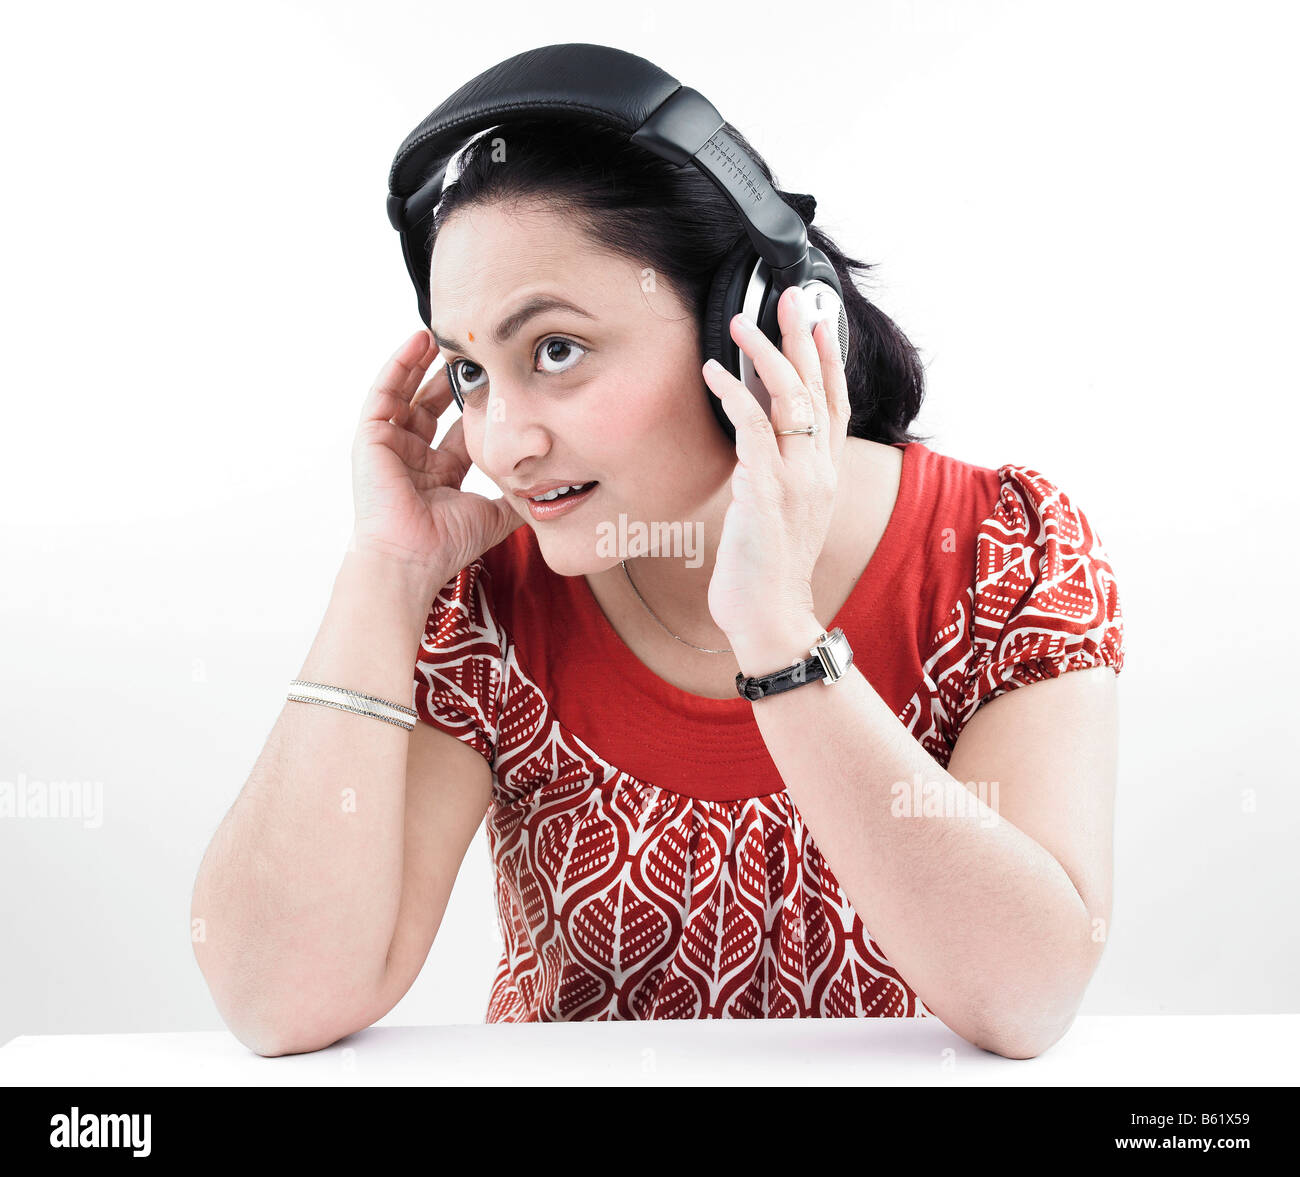 asian woman of indian origin listening to music with her headphones on Stock Photo